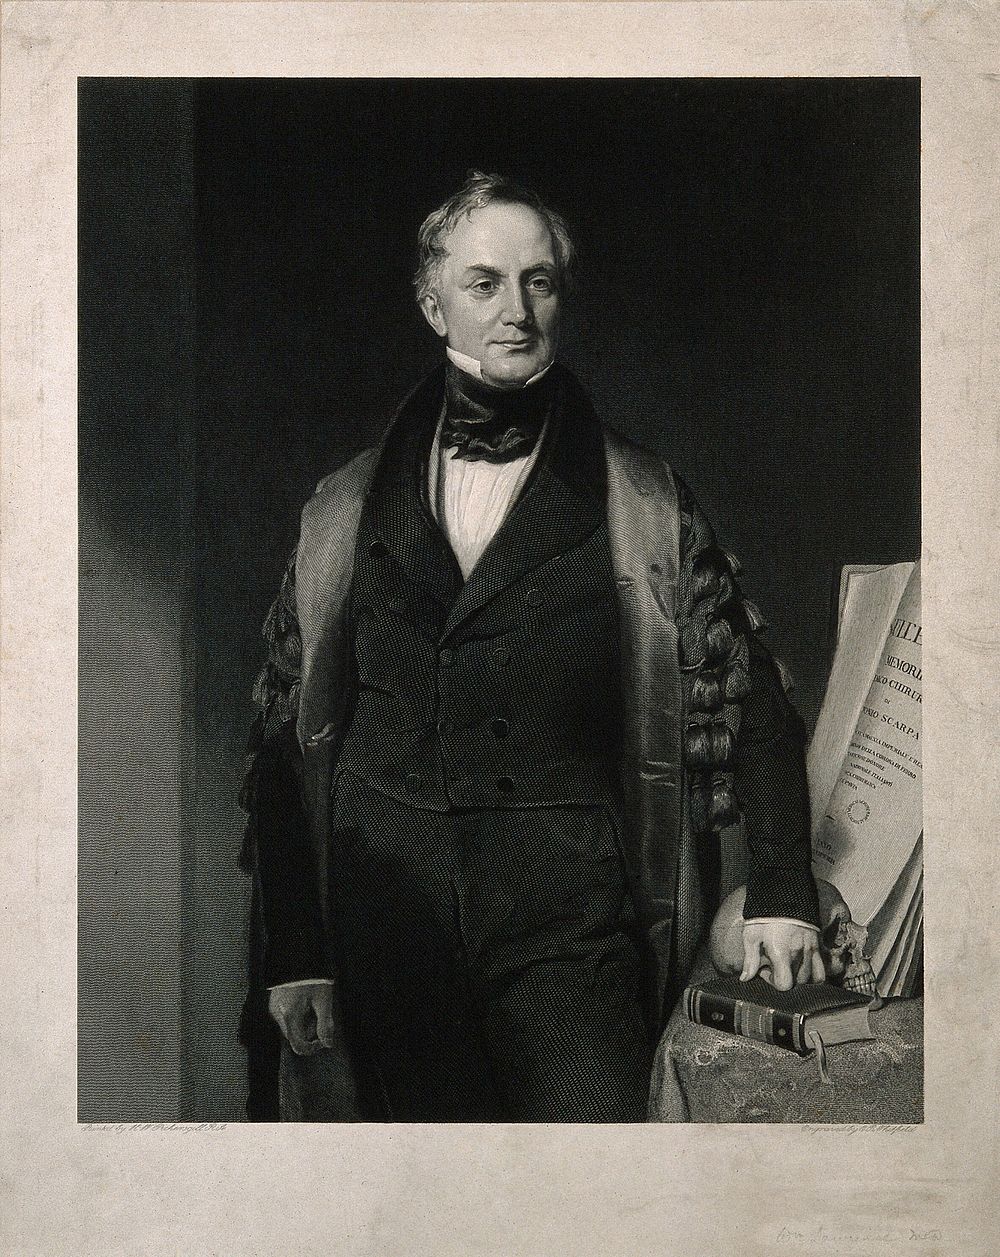 Sir William Lawrence. Line engraving by E. R. Whitfield, 1842, after H. W. Pickersgill, 1841.